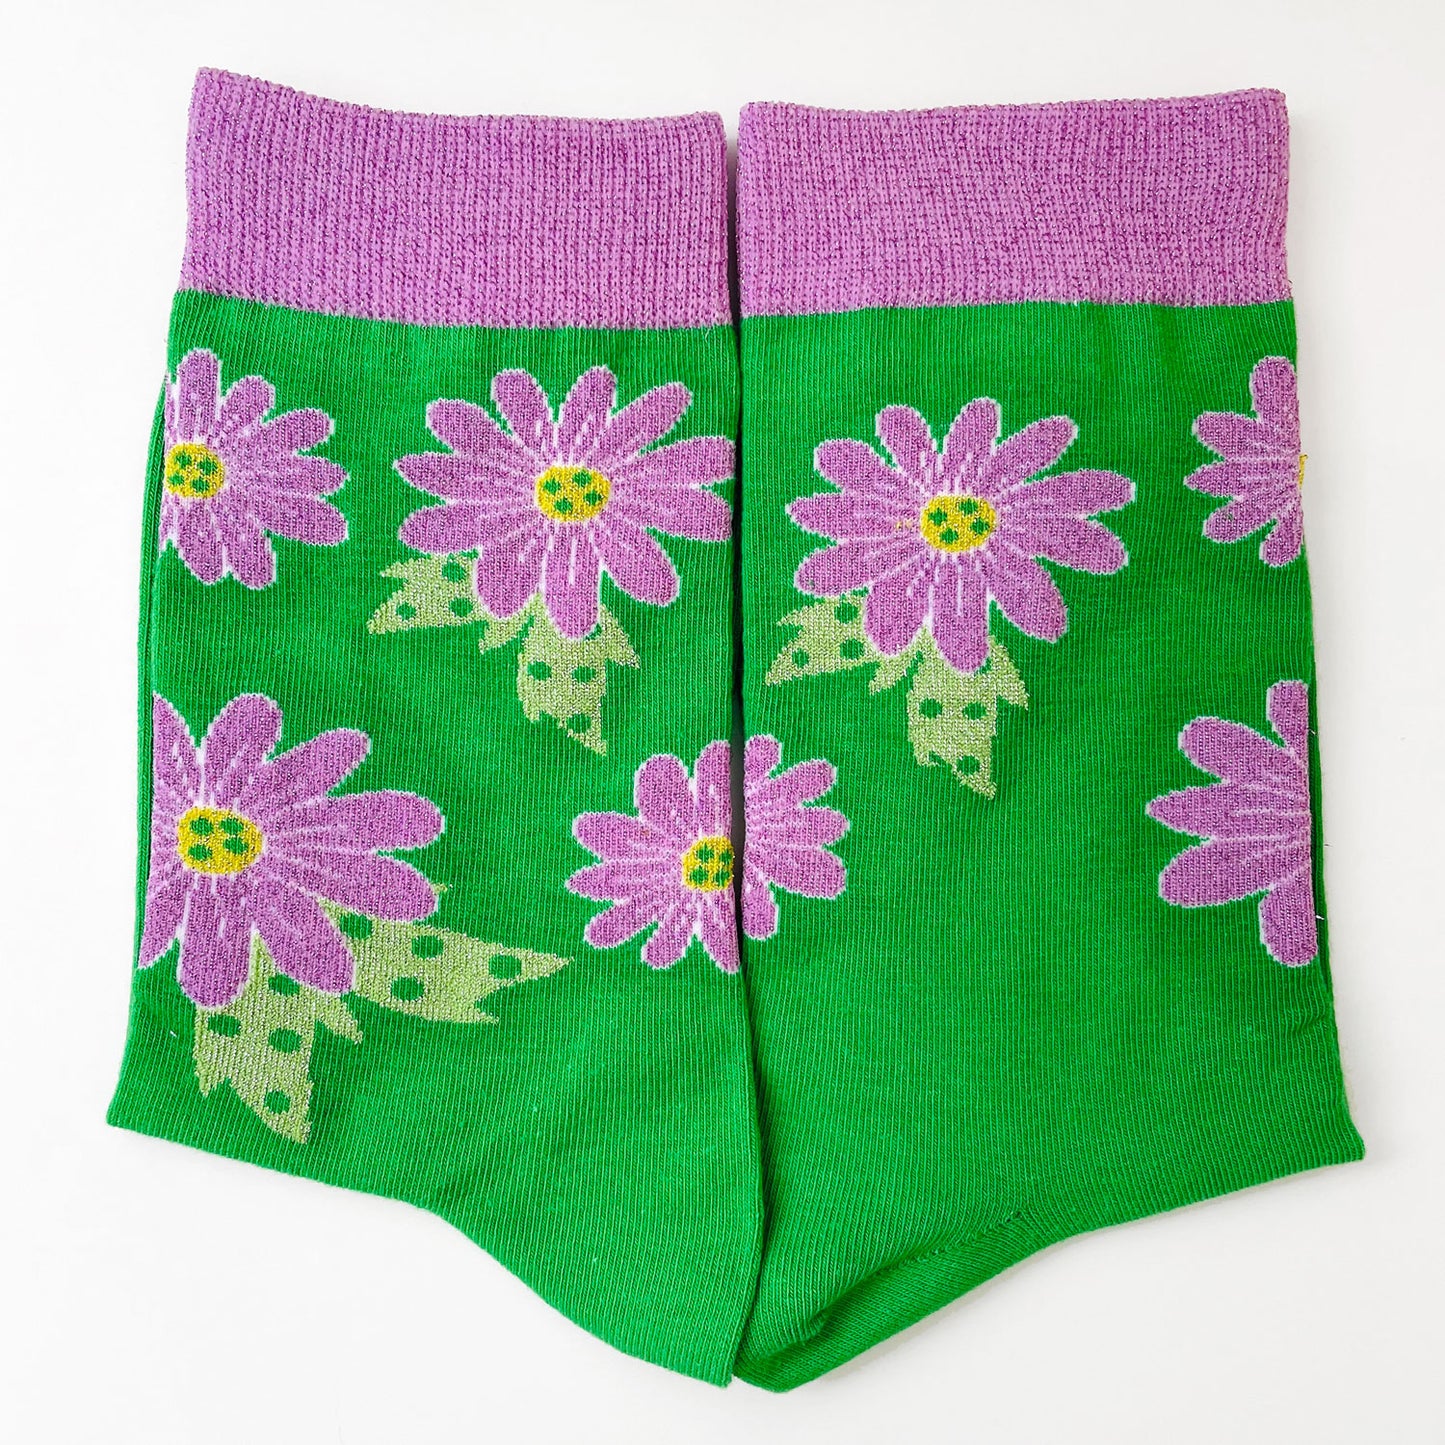 Green sock with purple flowers in cotton with mettalic yarn details